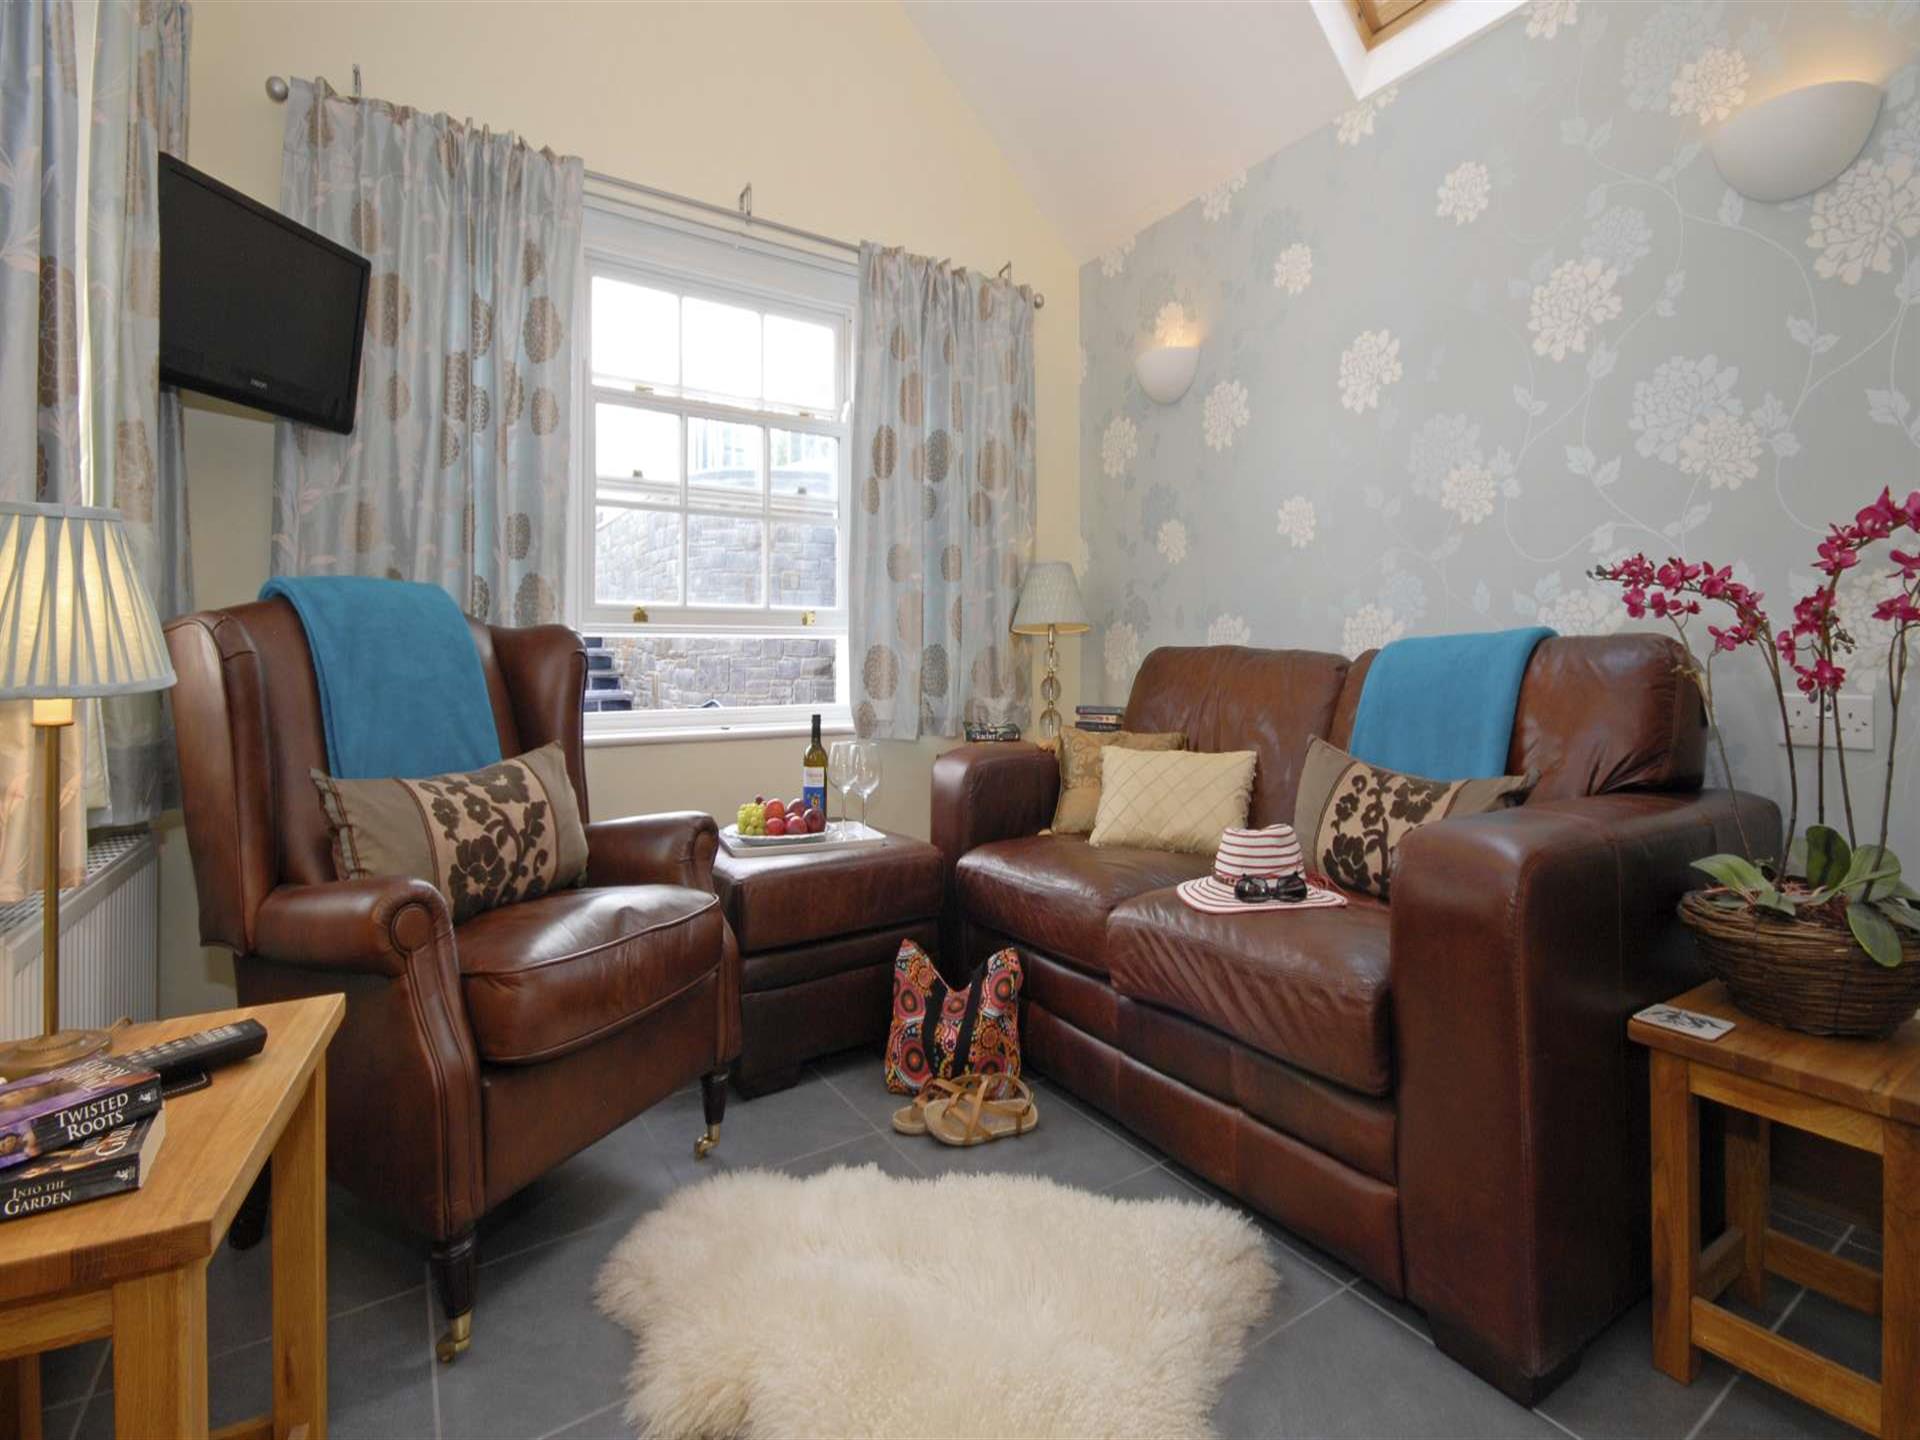 Aberaeron holiday home with sun room off the kitch